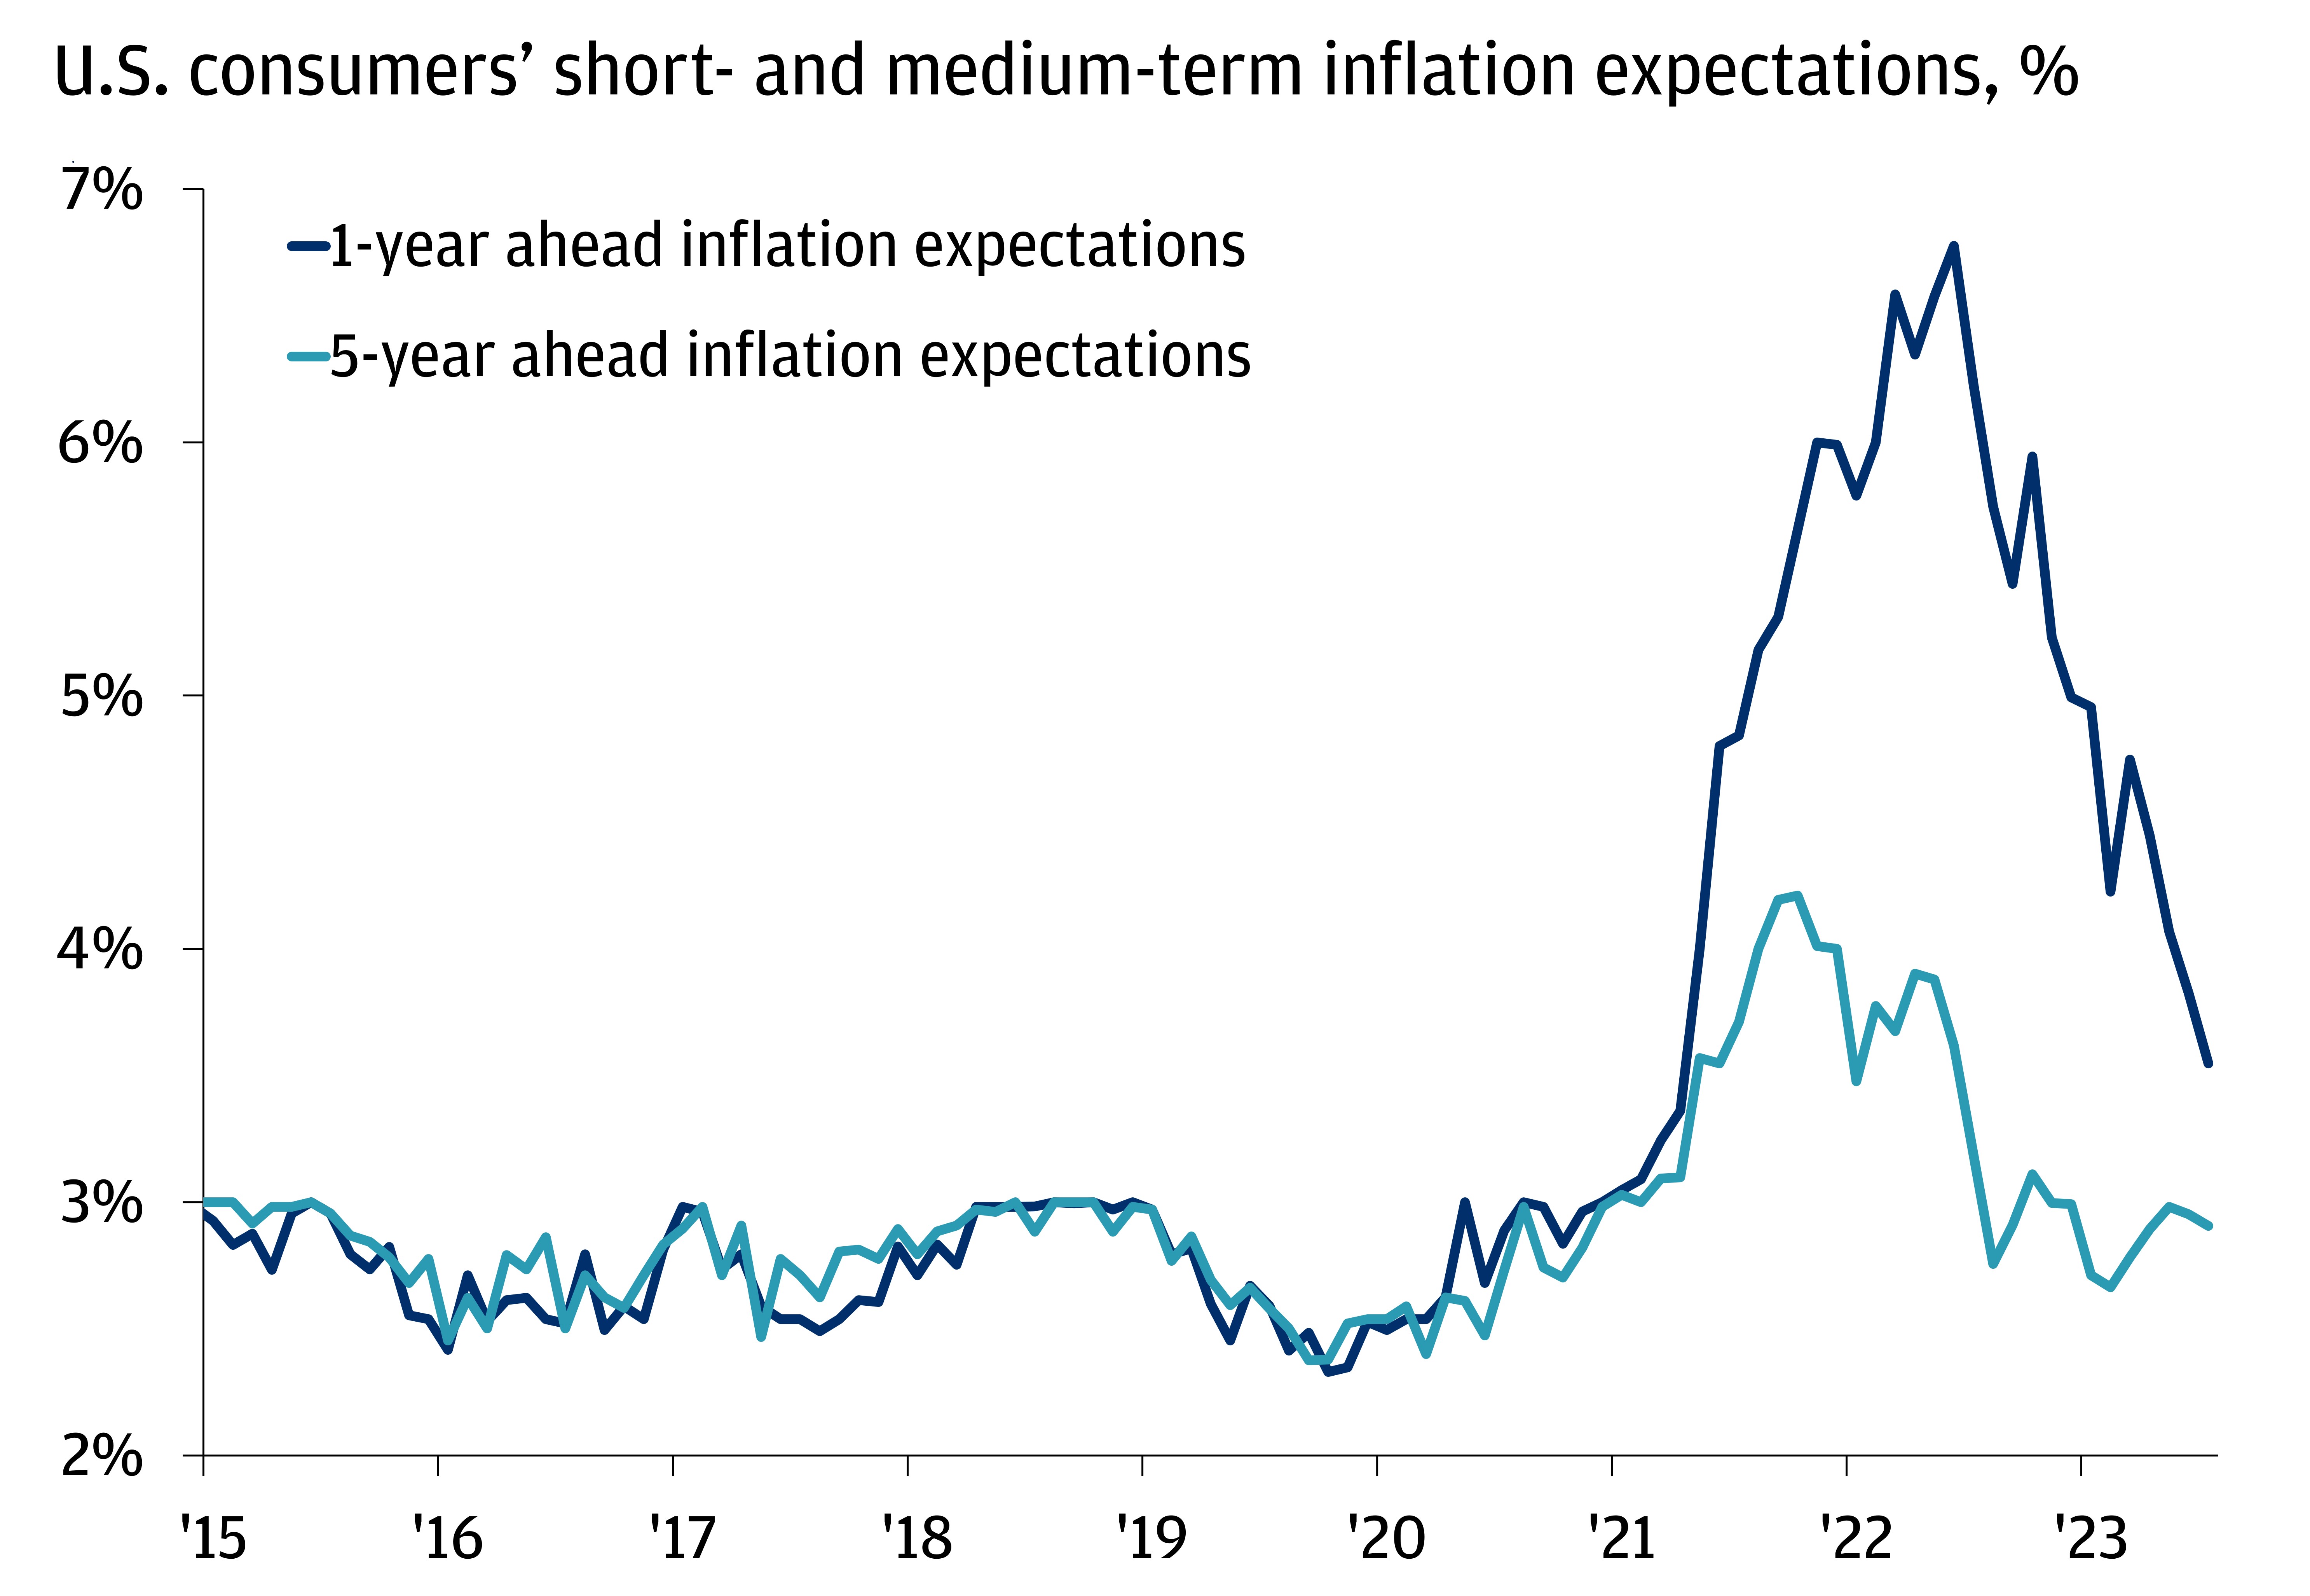 This chart shows U.S. consumers’ short-term (1 year) and medium-term (5 year) inflation expectations in percentage points from January 2015 through July 2023.